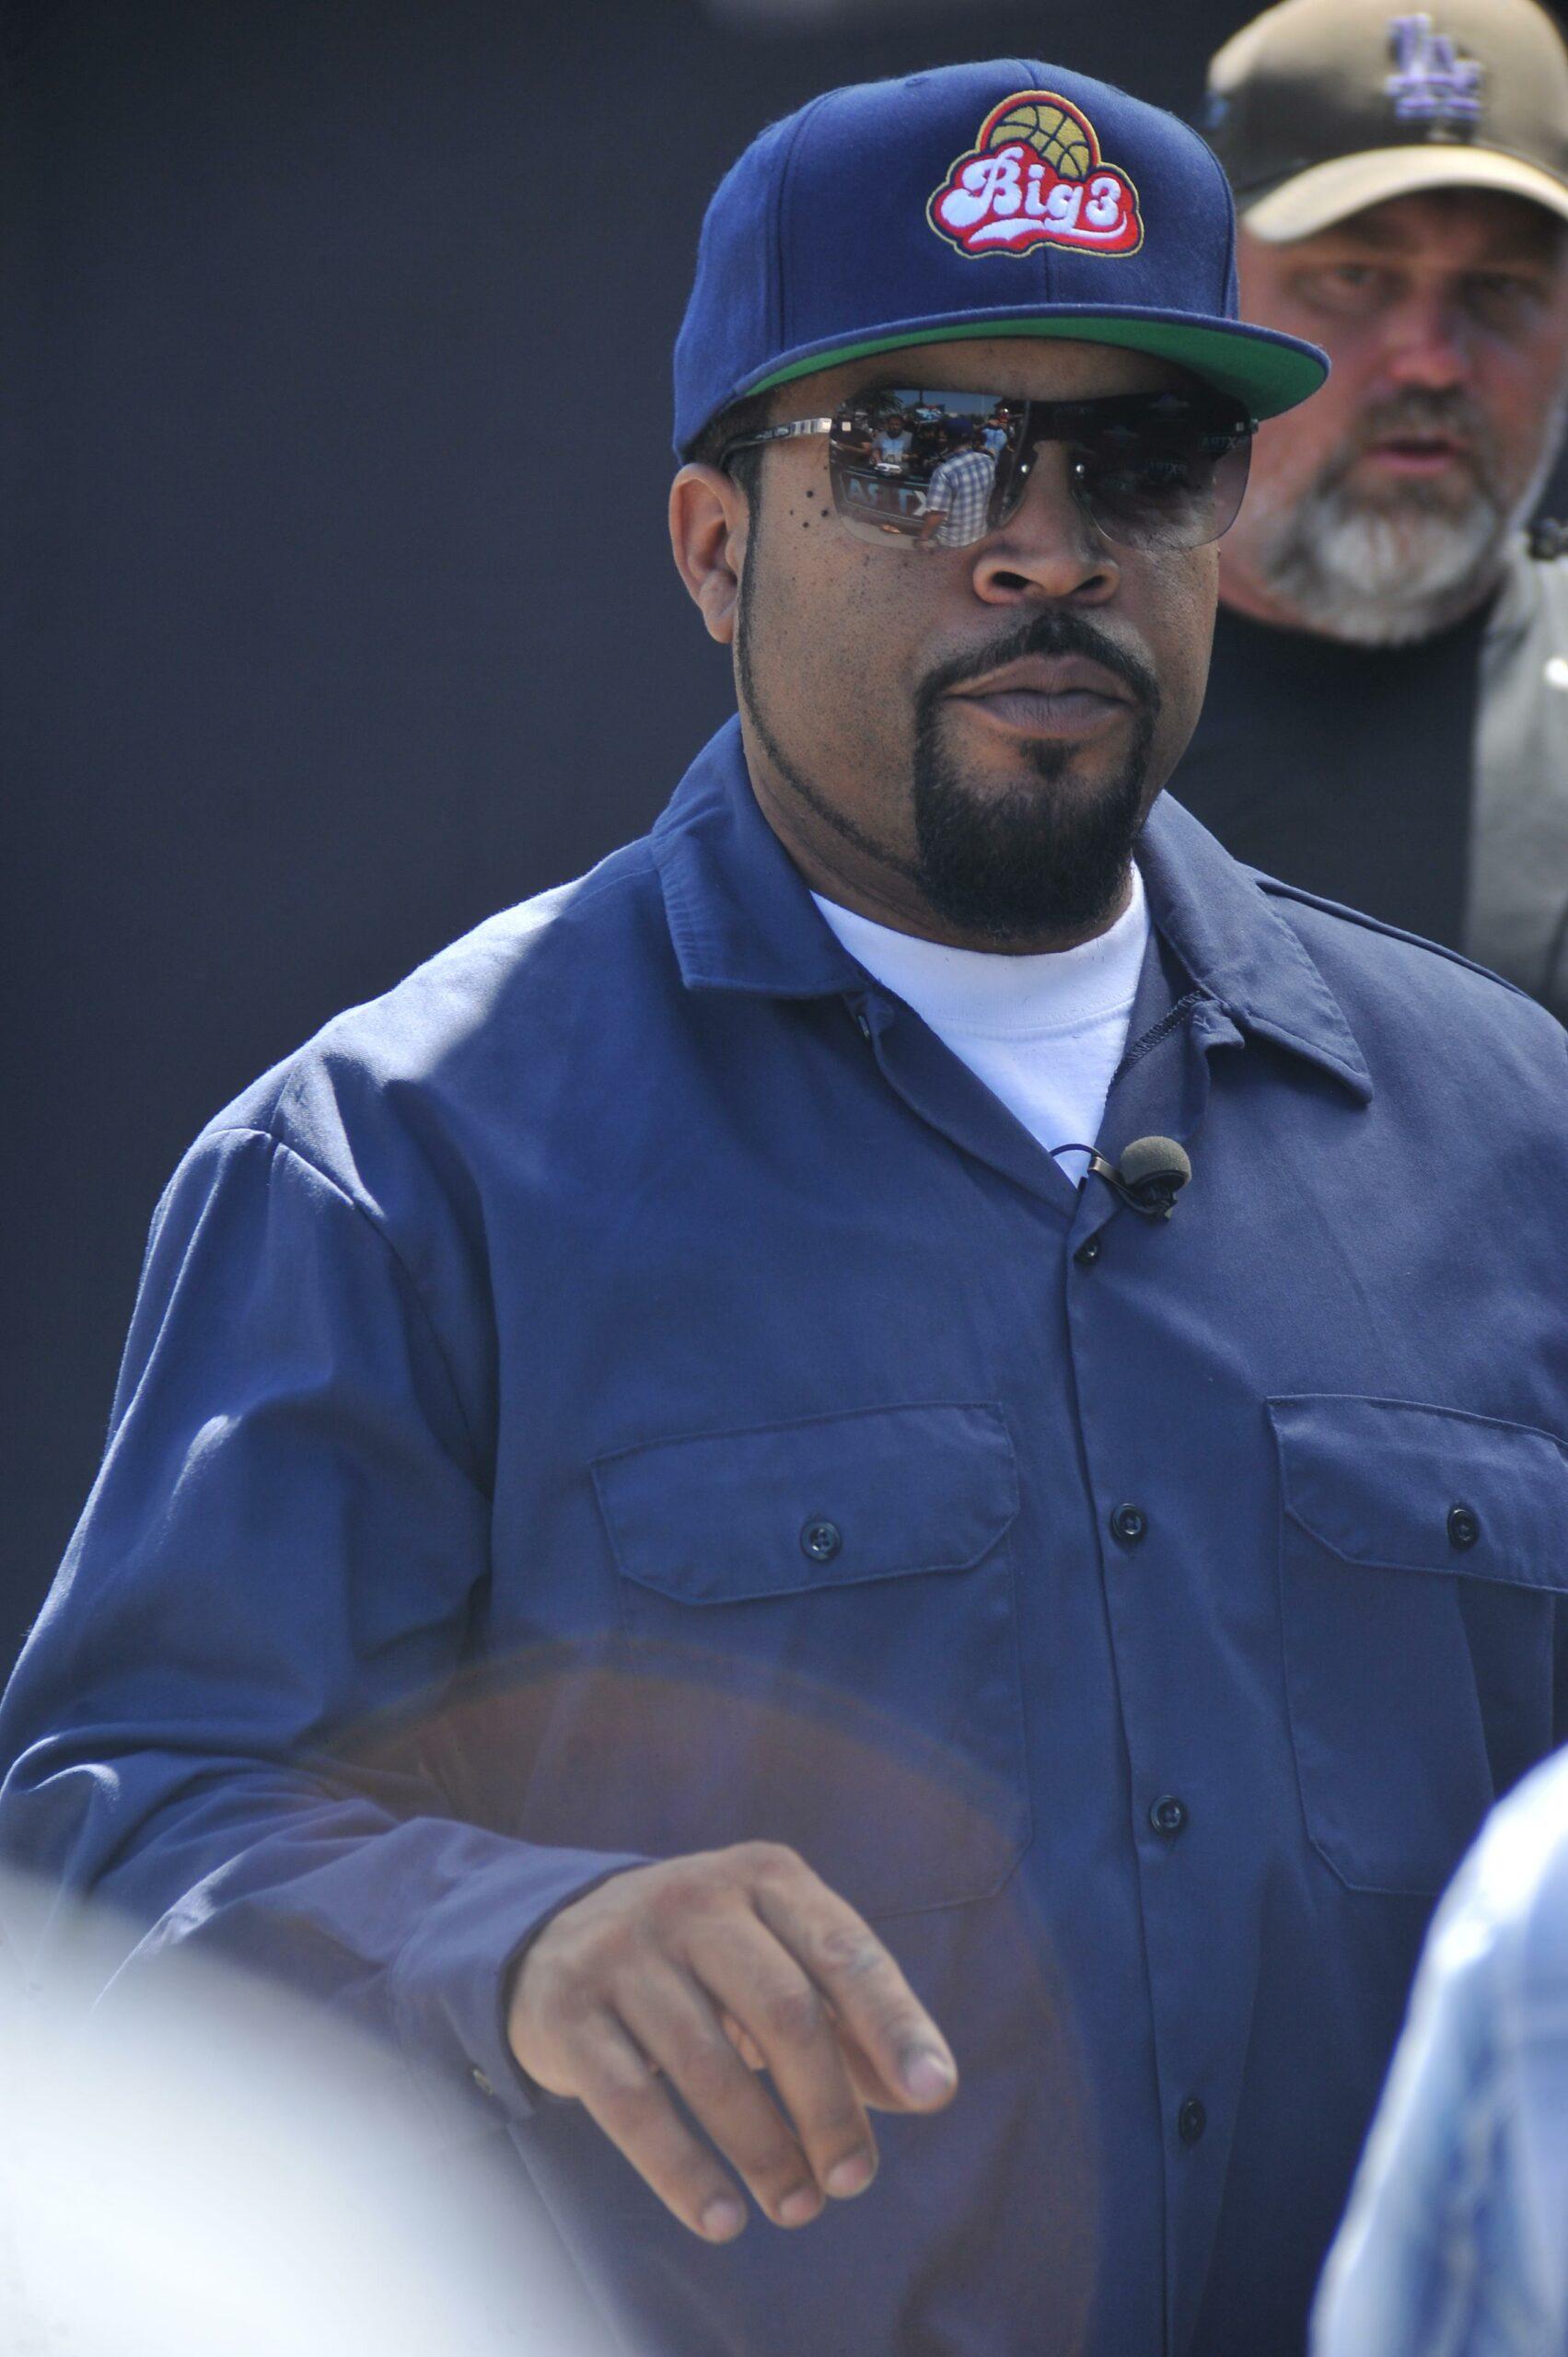 Ice Cube responds to accusations he 'robbed' Faison Love over salary for  1995 hit film Friday